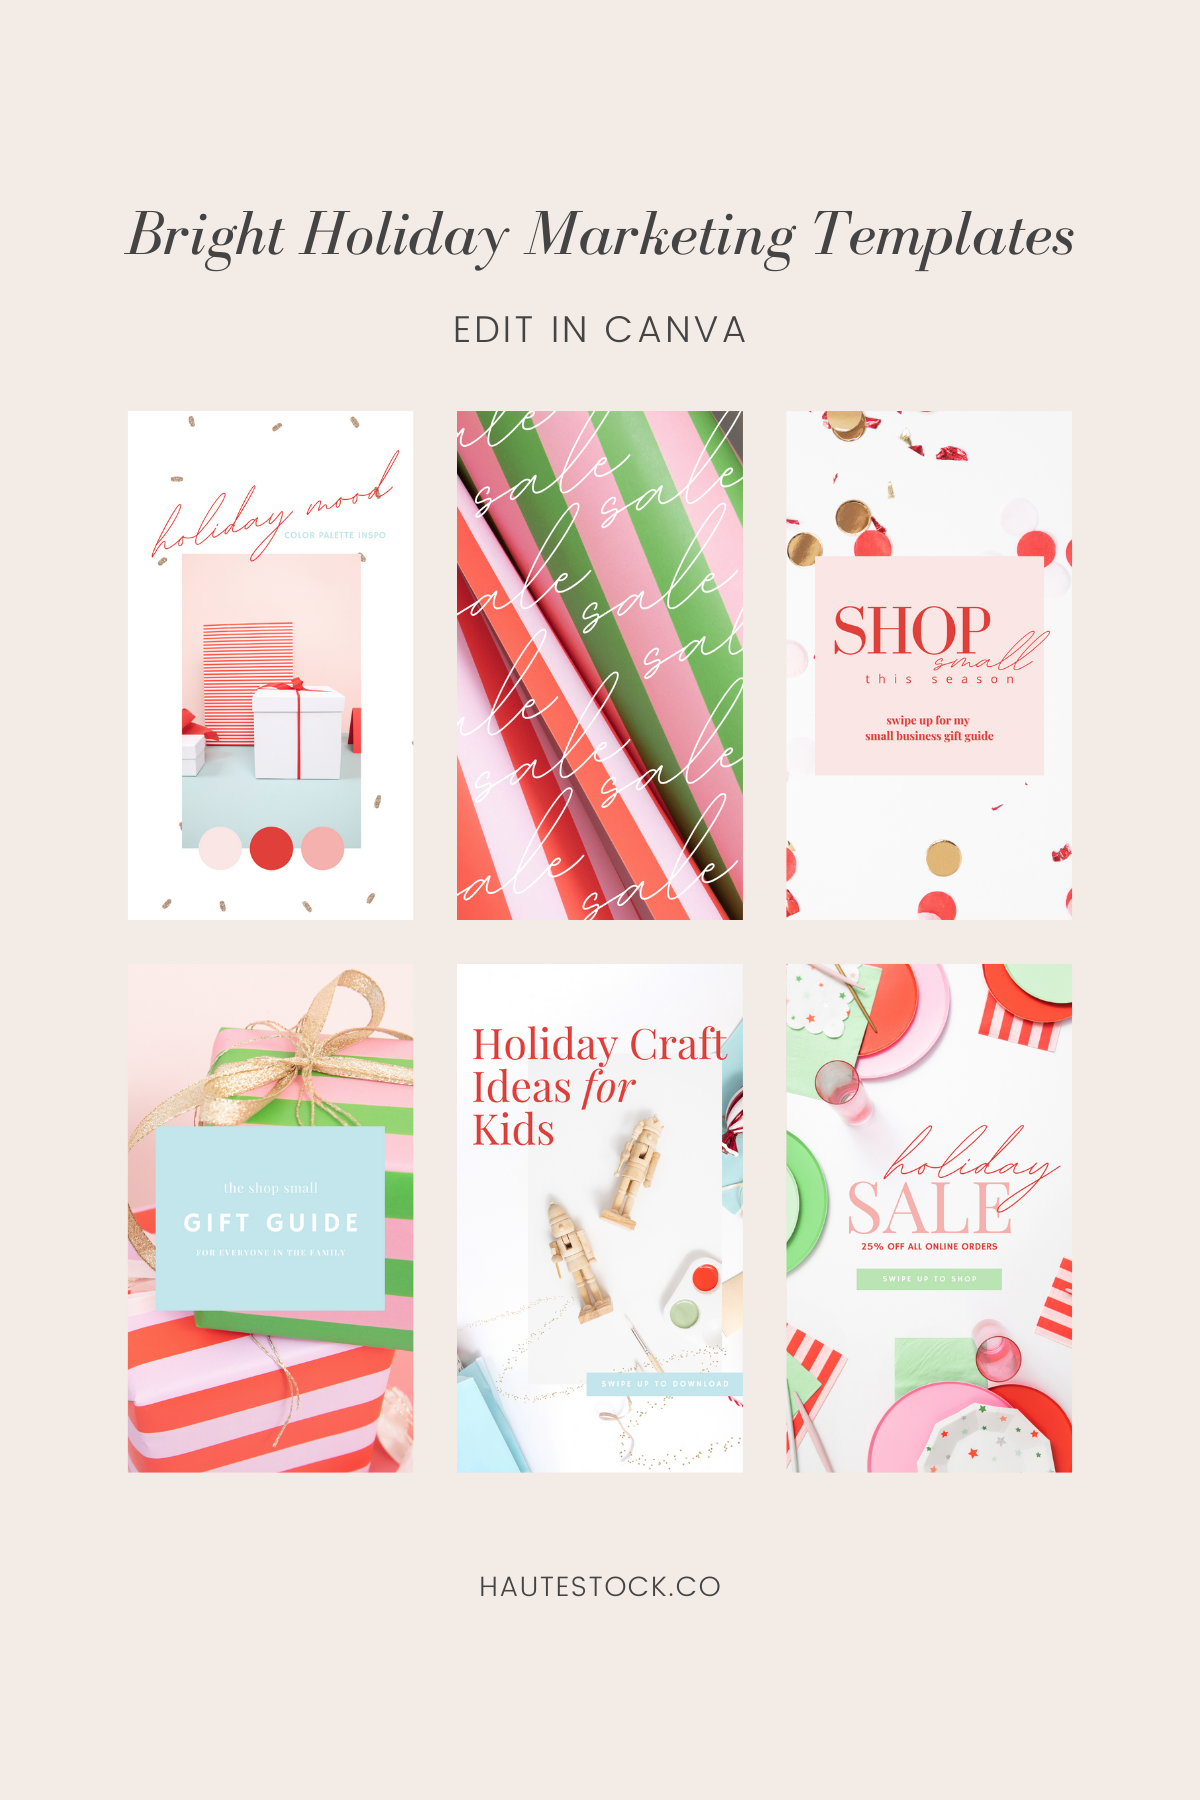 haute-stock-colorful-holiday-stock-photo-canva-holiday-marketing-promotions.png